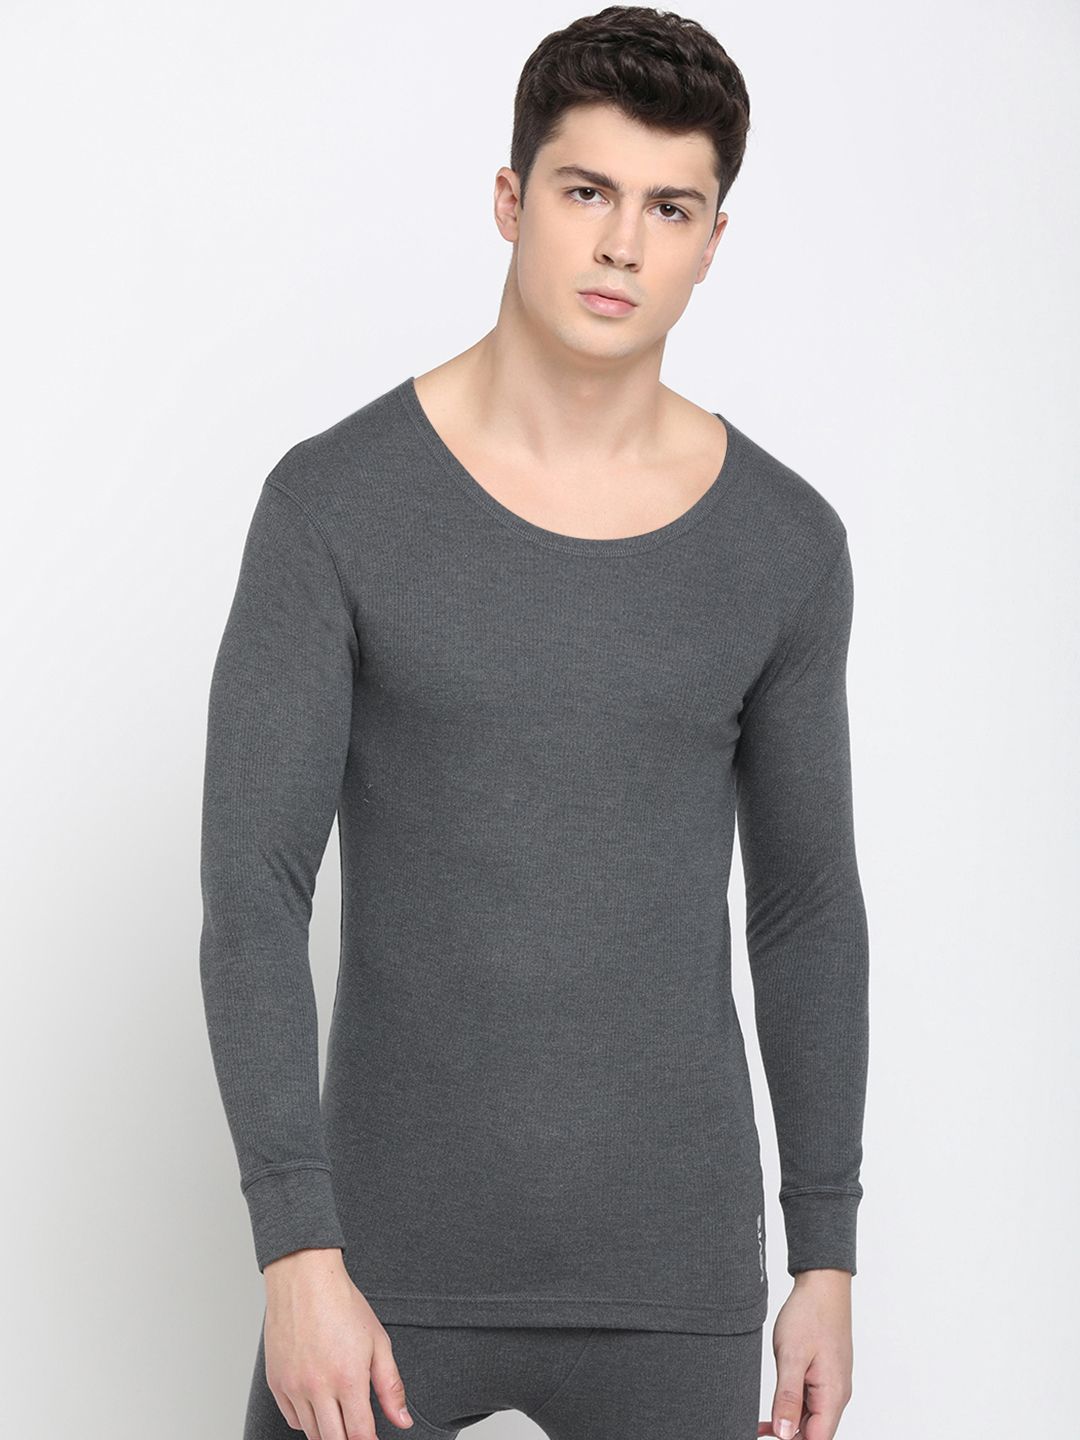 Levis Men Charcoal Grey Solid Thermal Top Price in India